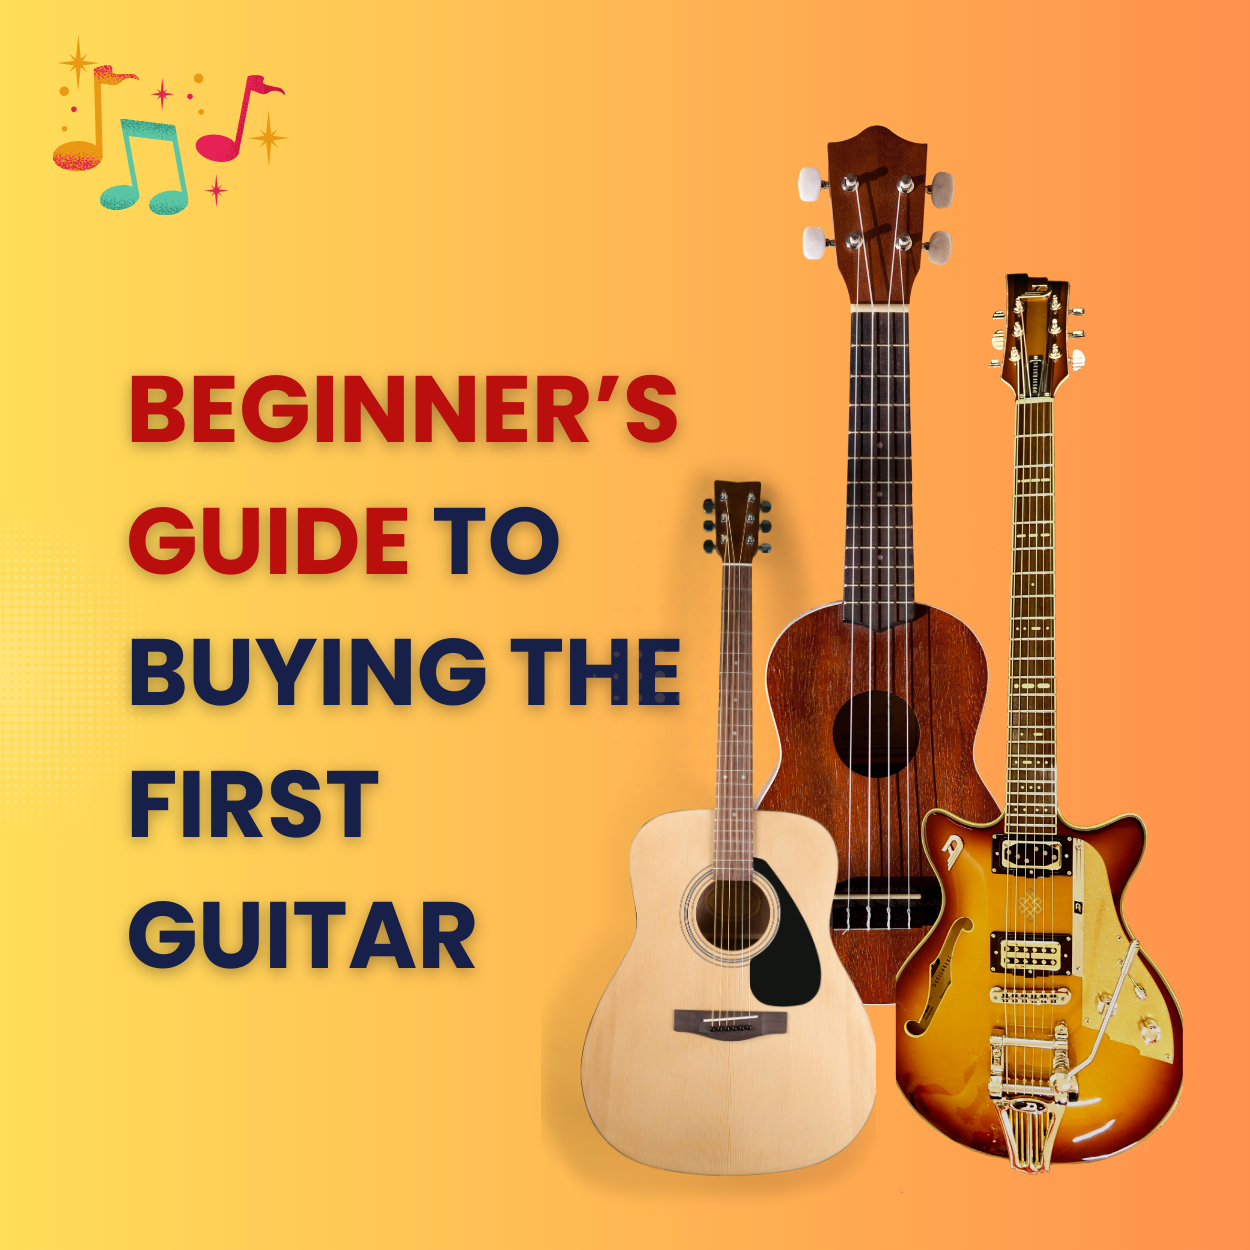 Beginner’s Guide to Buying the First Guitar